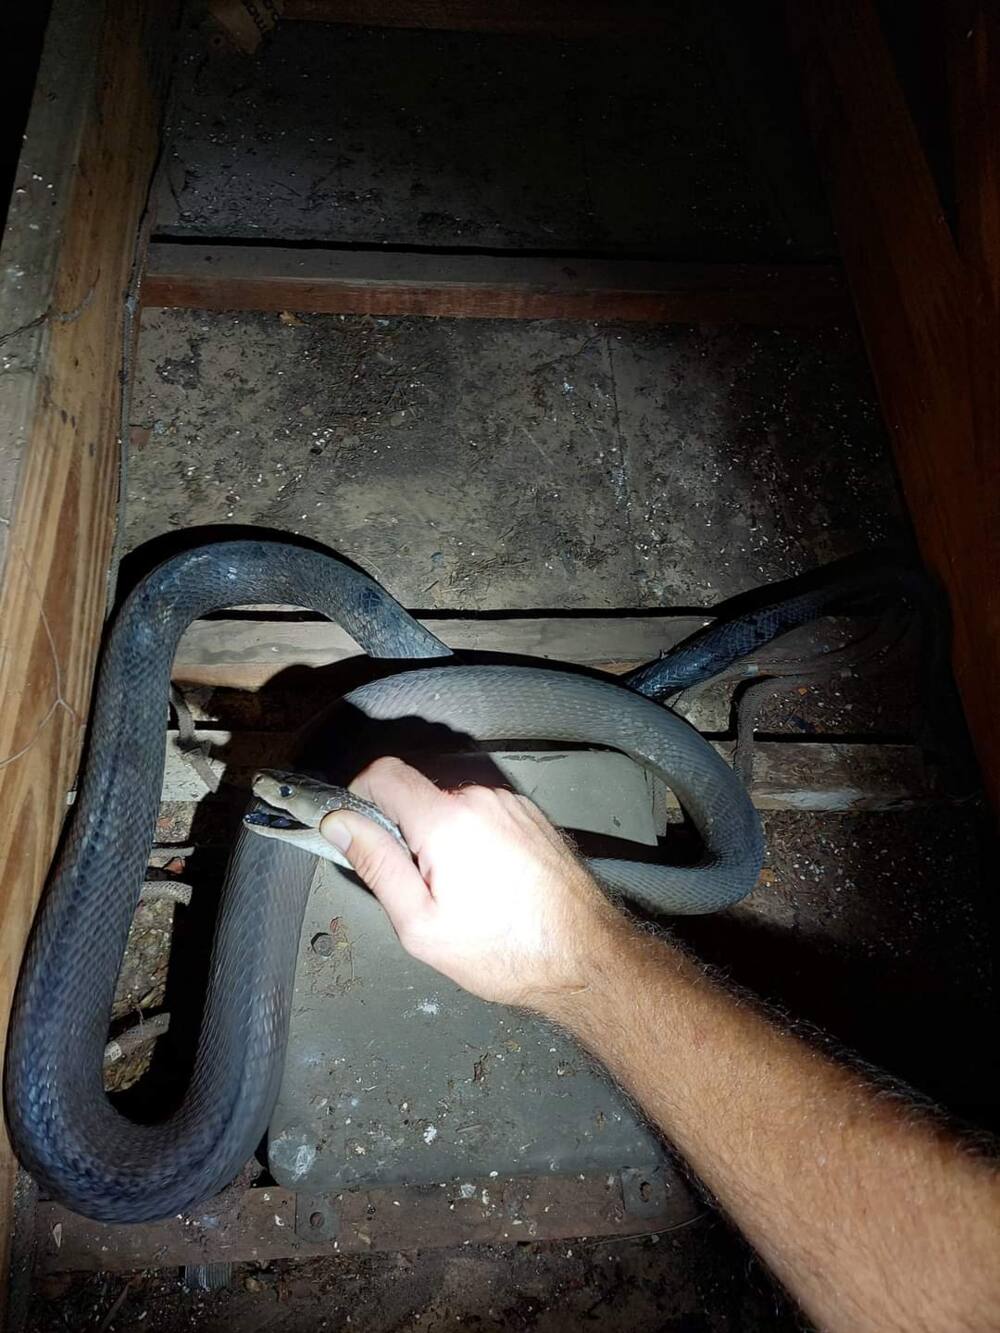 An enormous black mamba was found in a ceiling in Moseley, KwaZulu-Natal and was rescued by Nick Evans